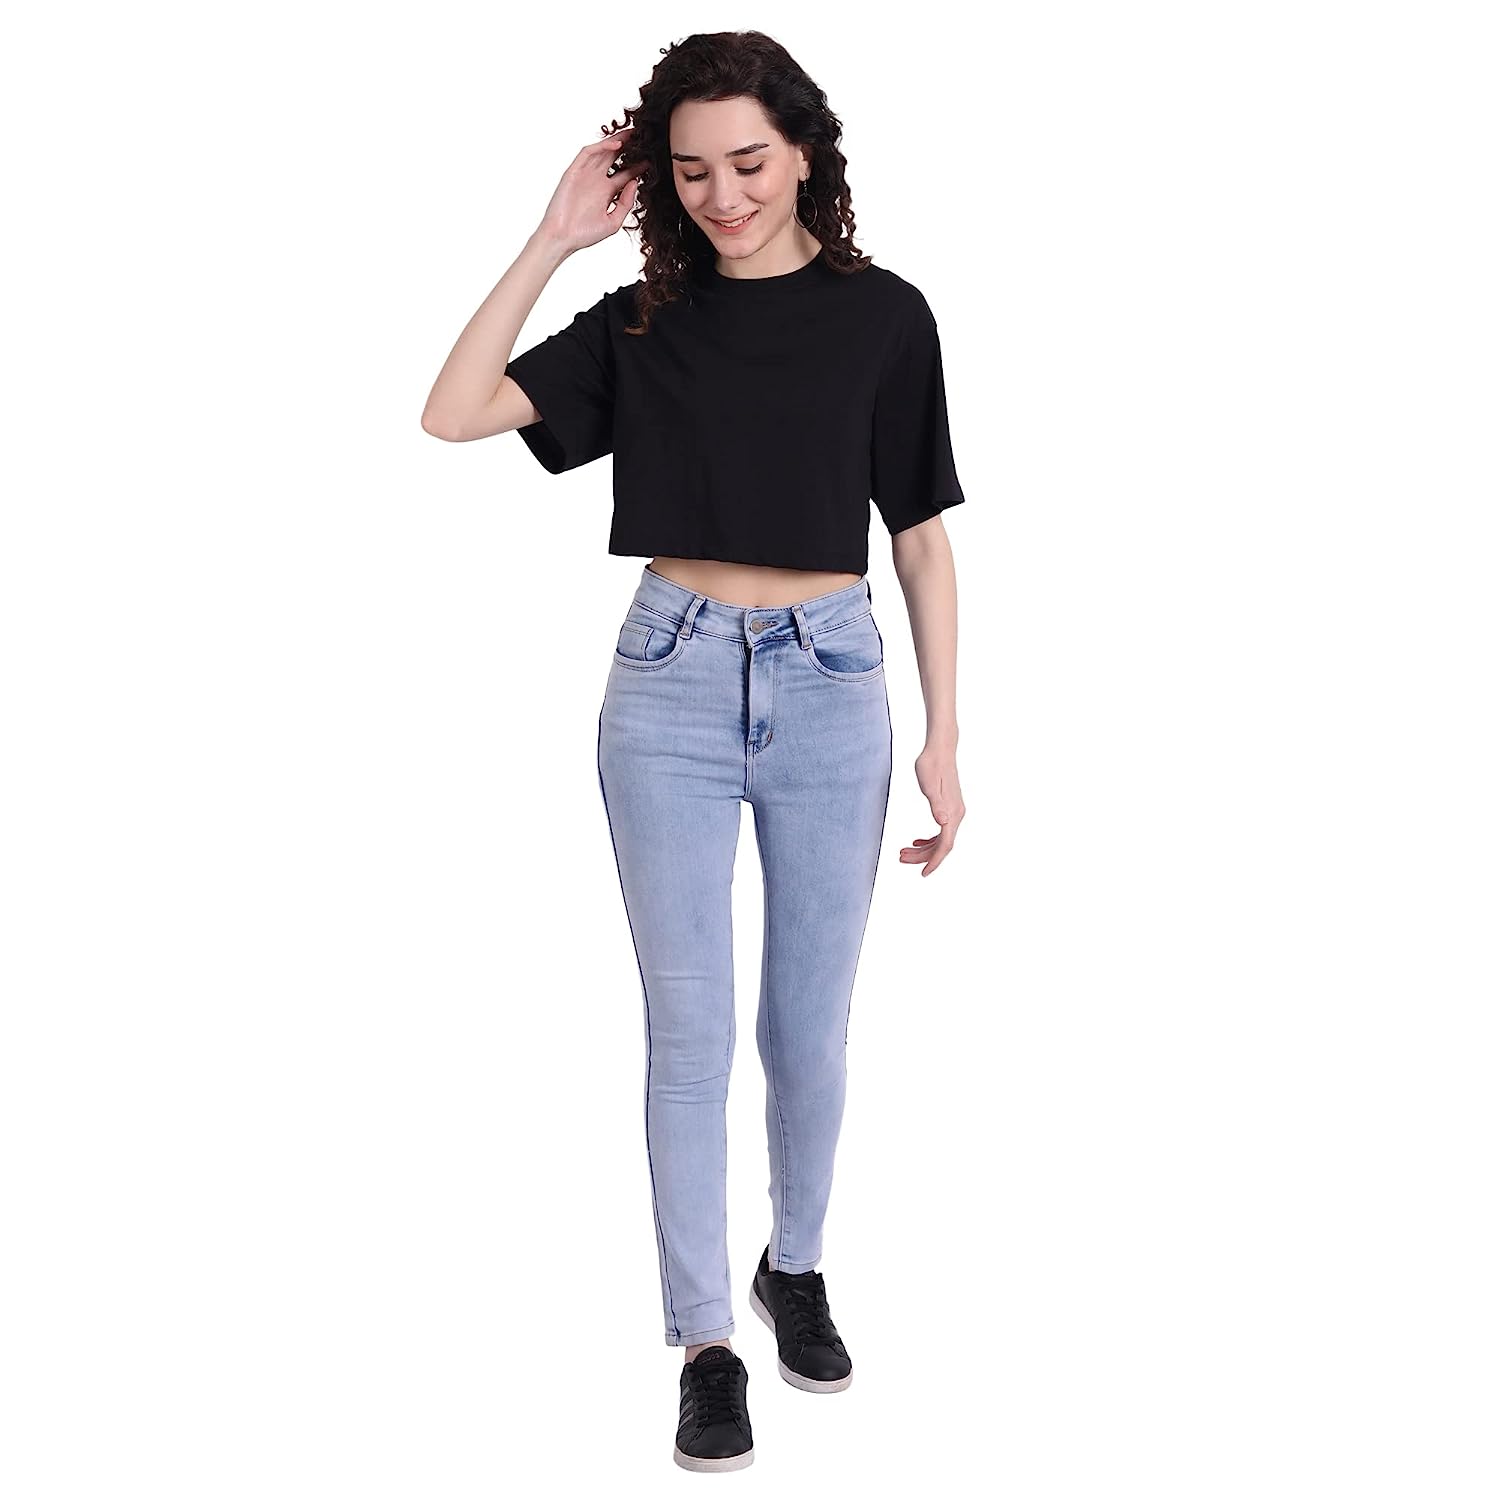 COLOR CAPITAL Oversized Cropped T-Shirt -  Women's T-Shirts in Sri Lanka from Arcade Online Shopping - Just Rs. 3219!